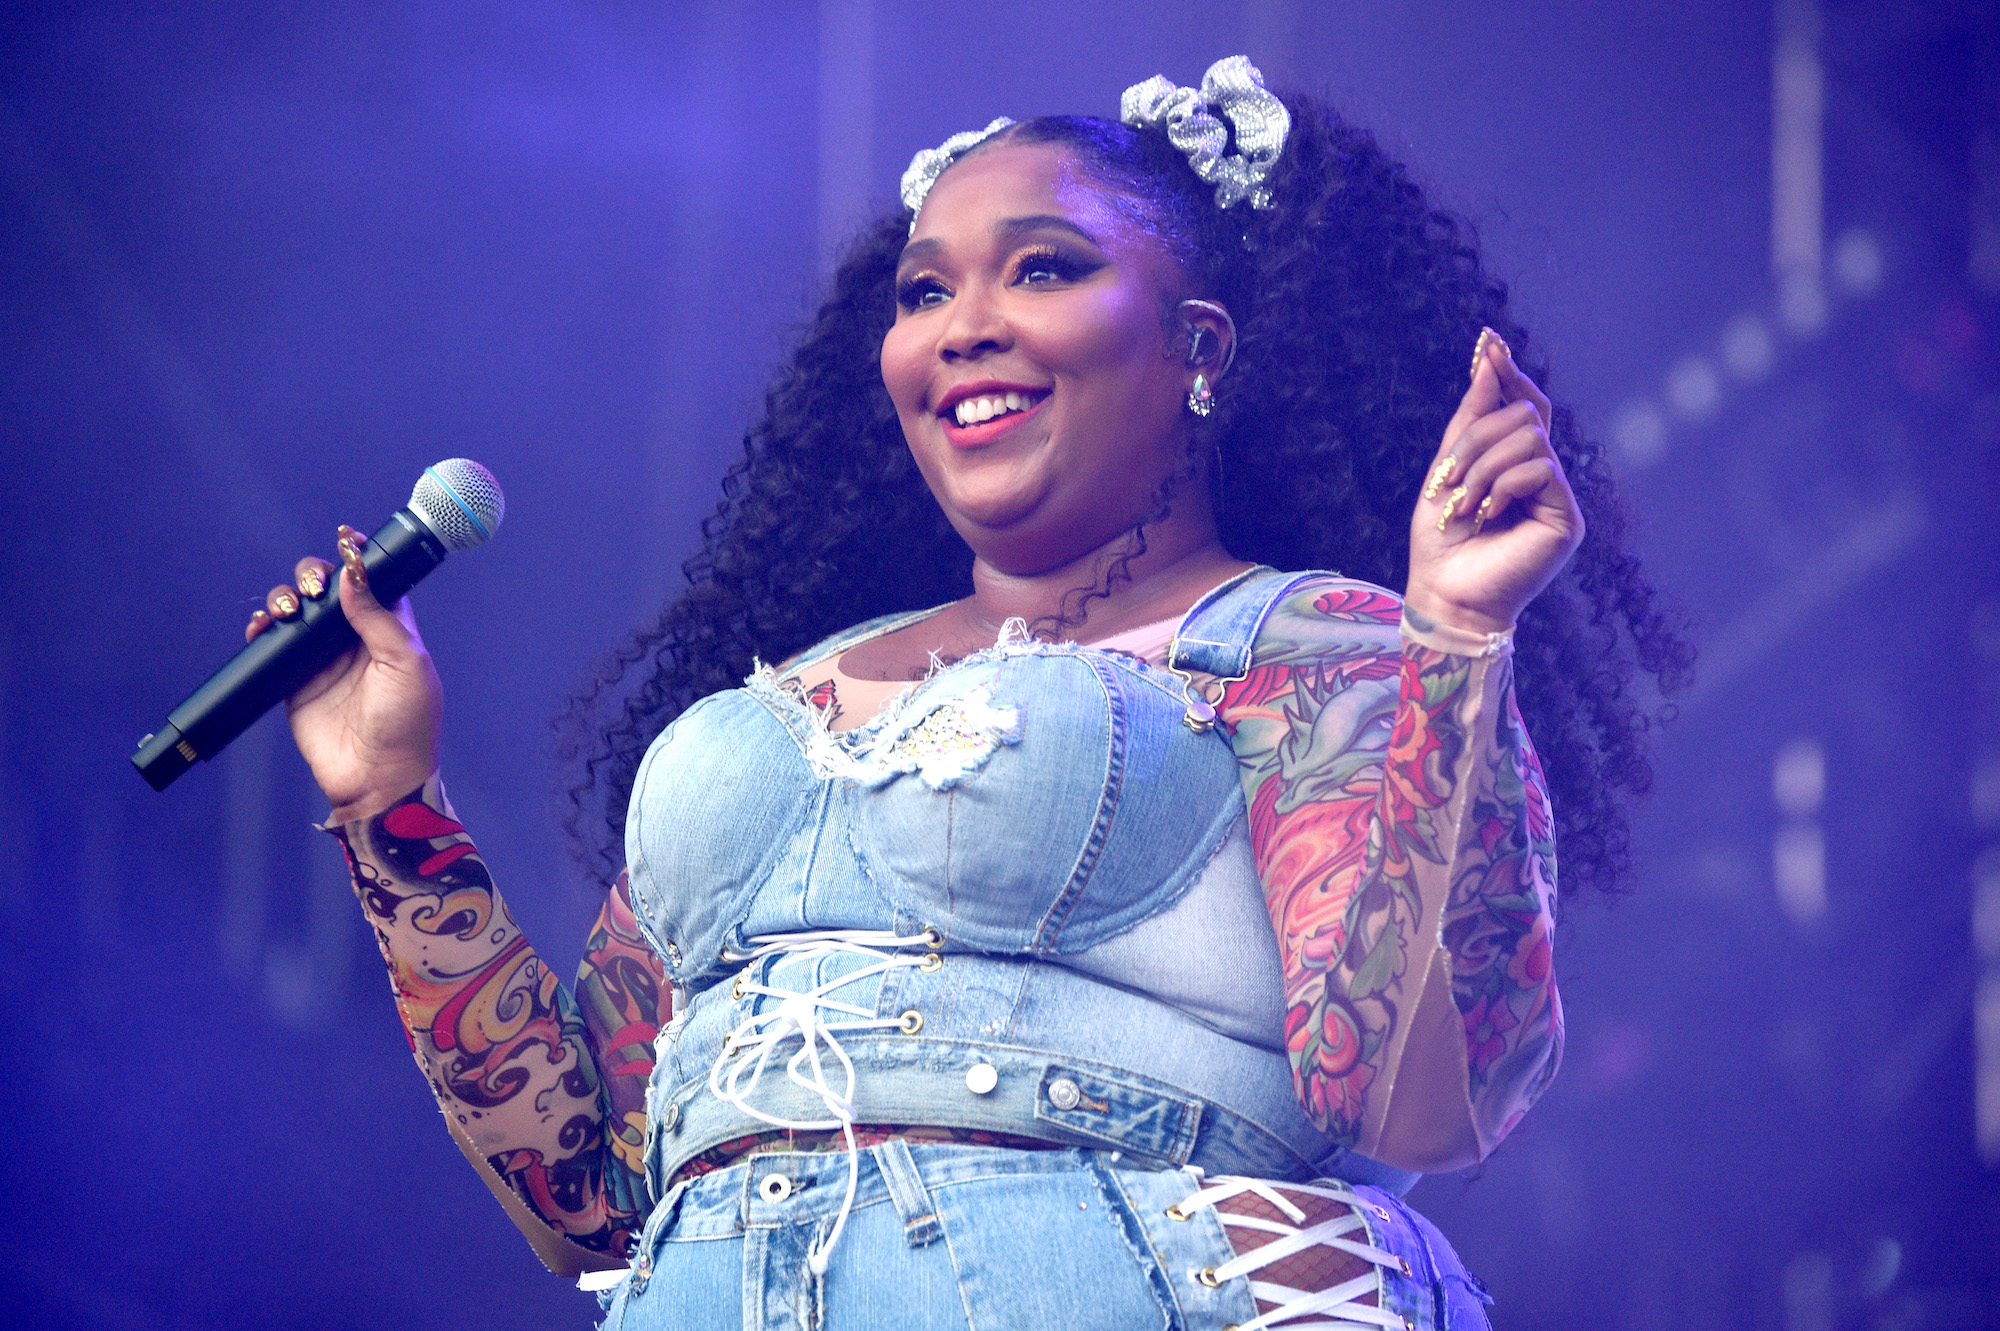 Lizzo smiling, holding a microphone, on stage